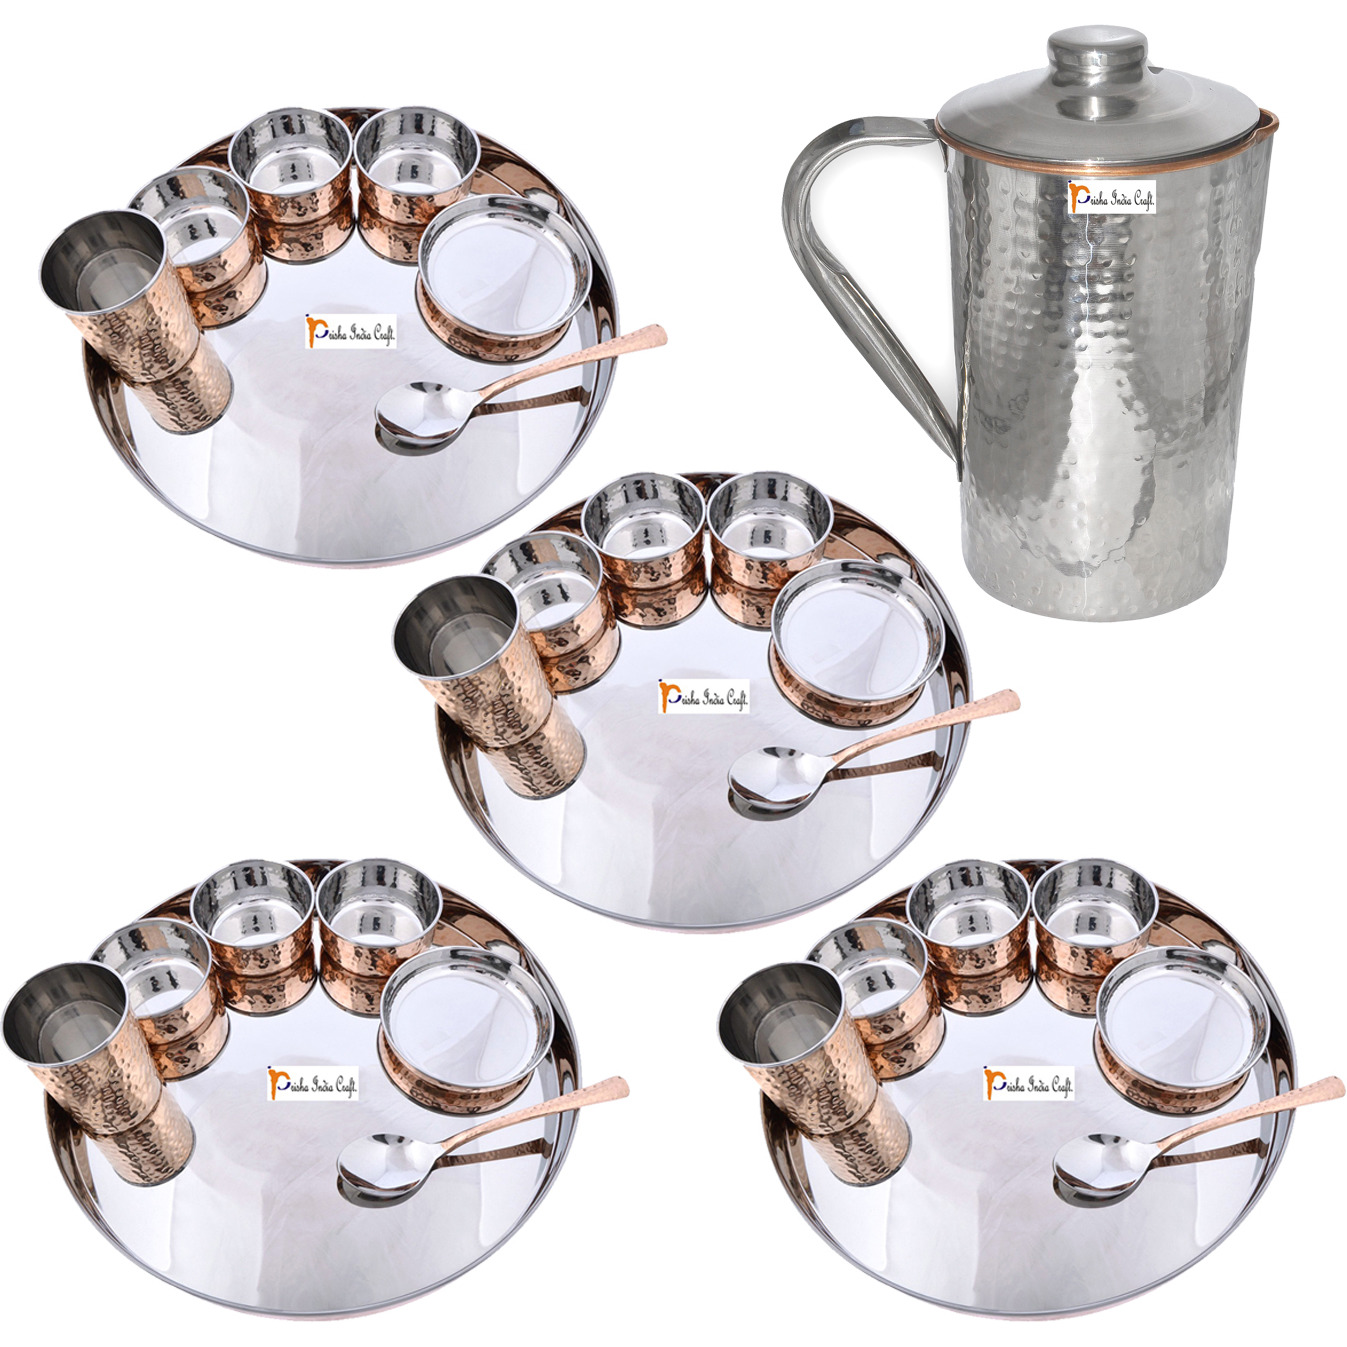 Prisha India Craft B. Set of 4 Dinnerware Traditional Stainless Steel Copper Dinner Set of Thali Plate, Bowls, Glass and Spoon, Dia 13  With 1 Stainless Steel Copper Hammered Pitcher Jug - Christmas Gift